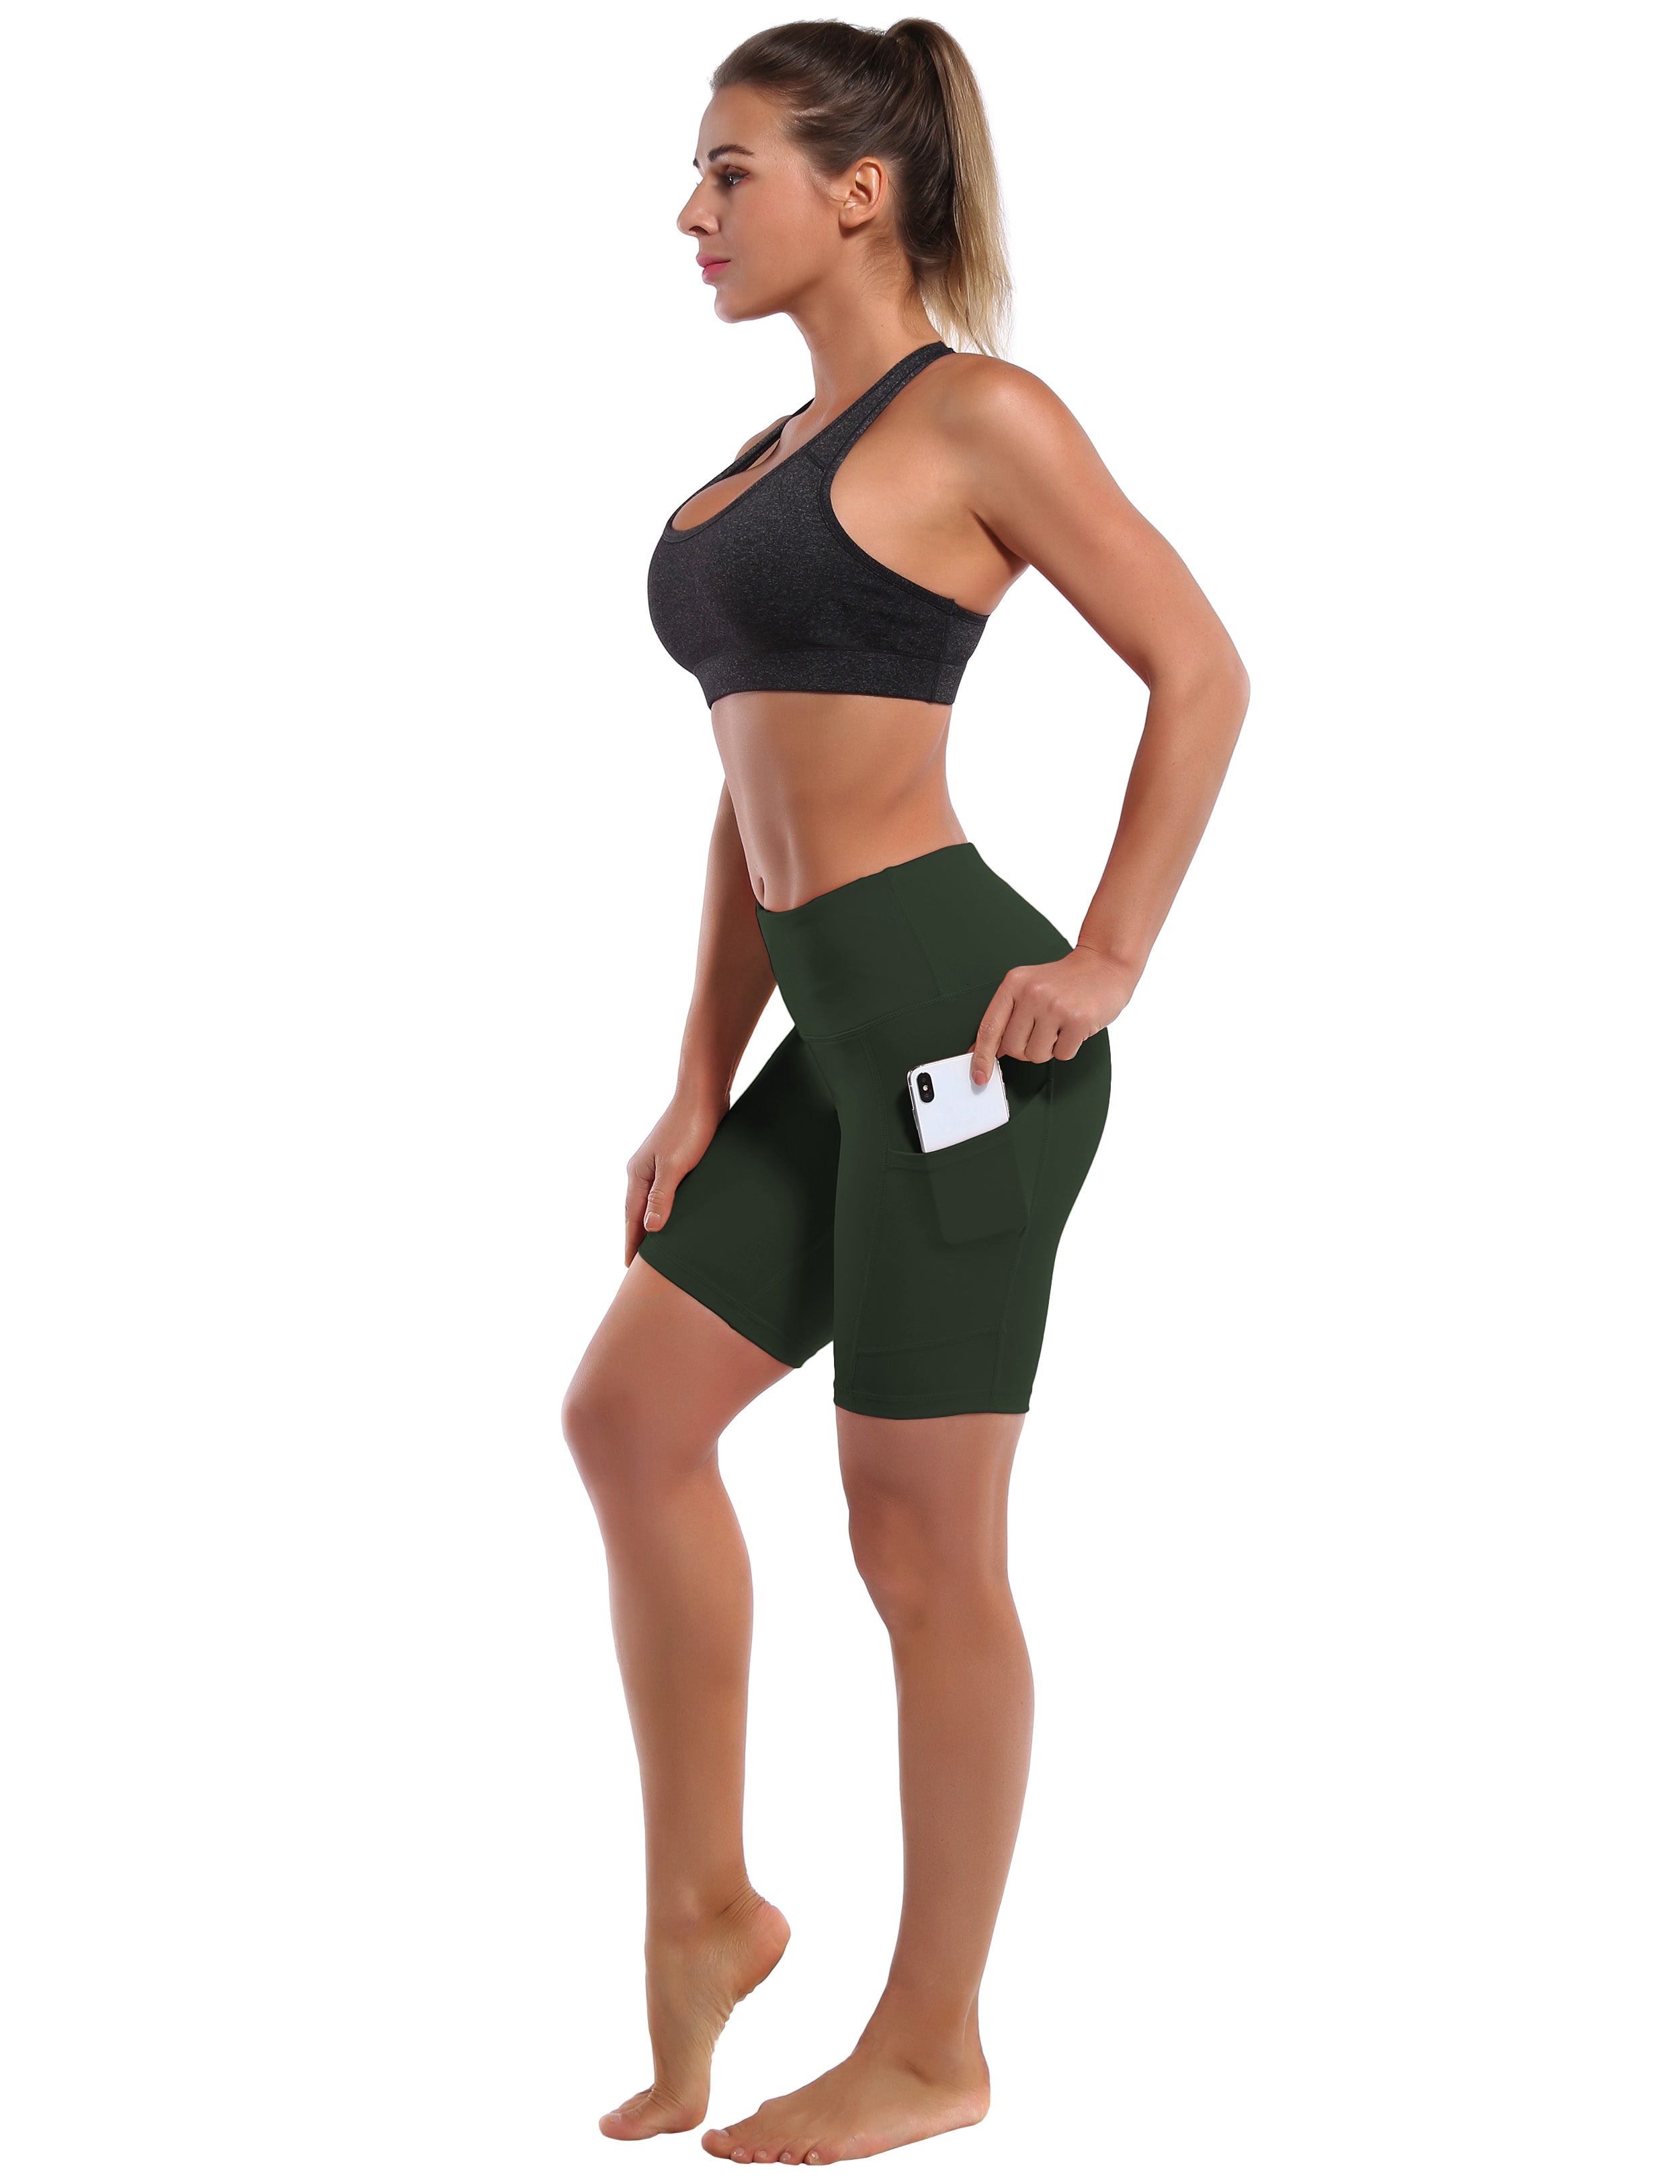 8" Side Pockets Golf Shorts olivegray Sleek, soft, smooth and totally comfortable: our newest style is here. Softest-ever fabric High elasticity High density 4-way stretch Fabric doesn't attract lint easily No see-through Moisture-wicking Machine wash 75% Nylon, 25% Spandex